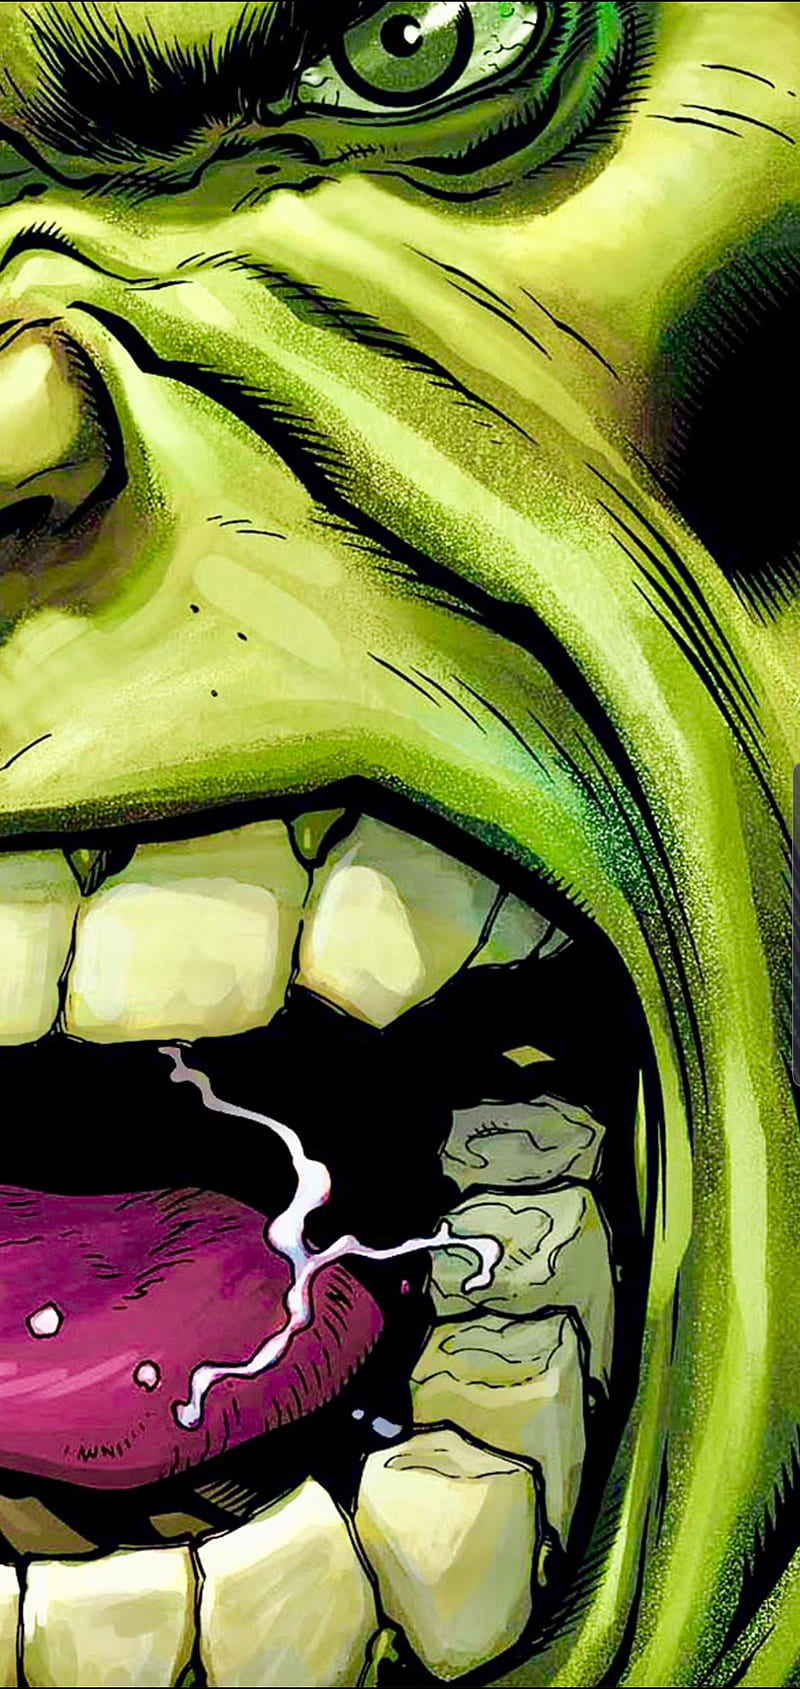 Was Hulk destroying the entire dark dimension in the “heart of the monster”  storyline? - Quora